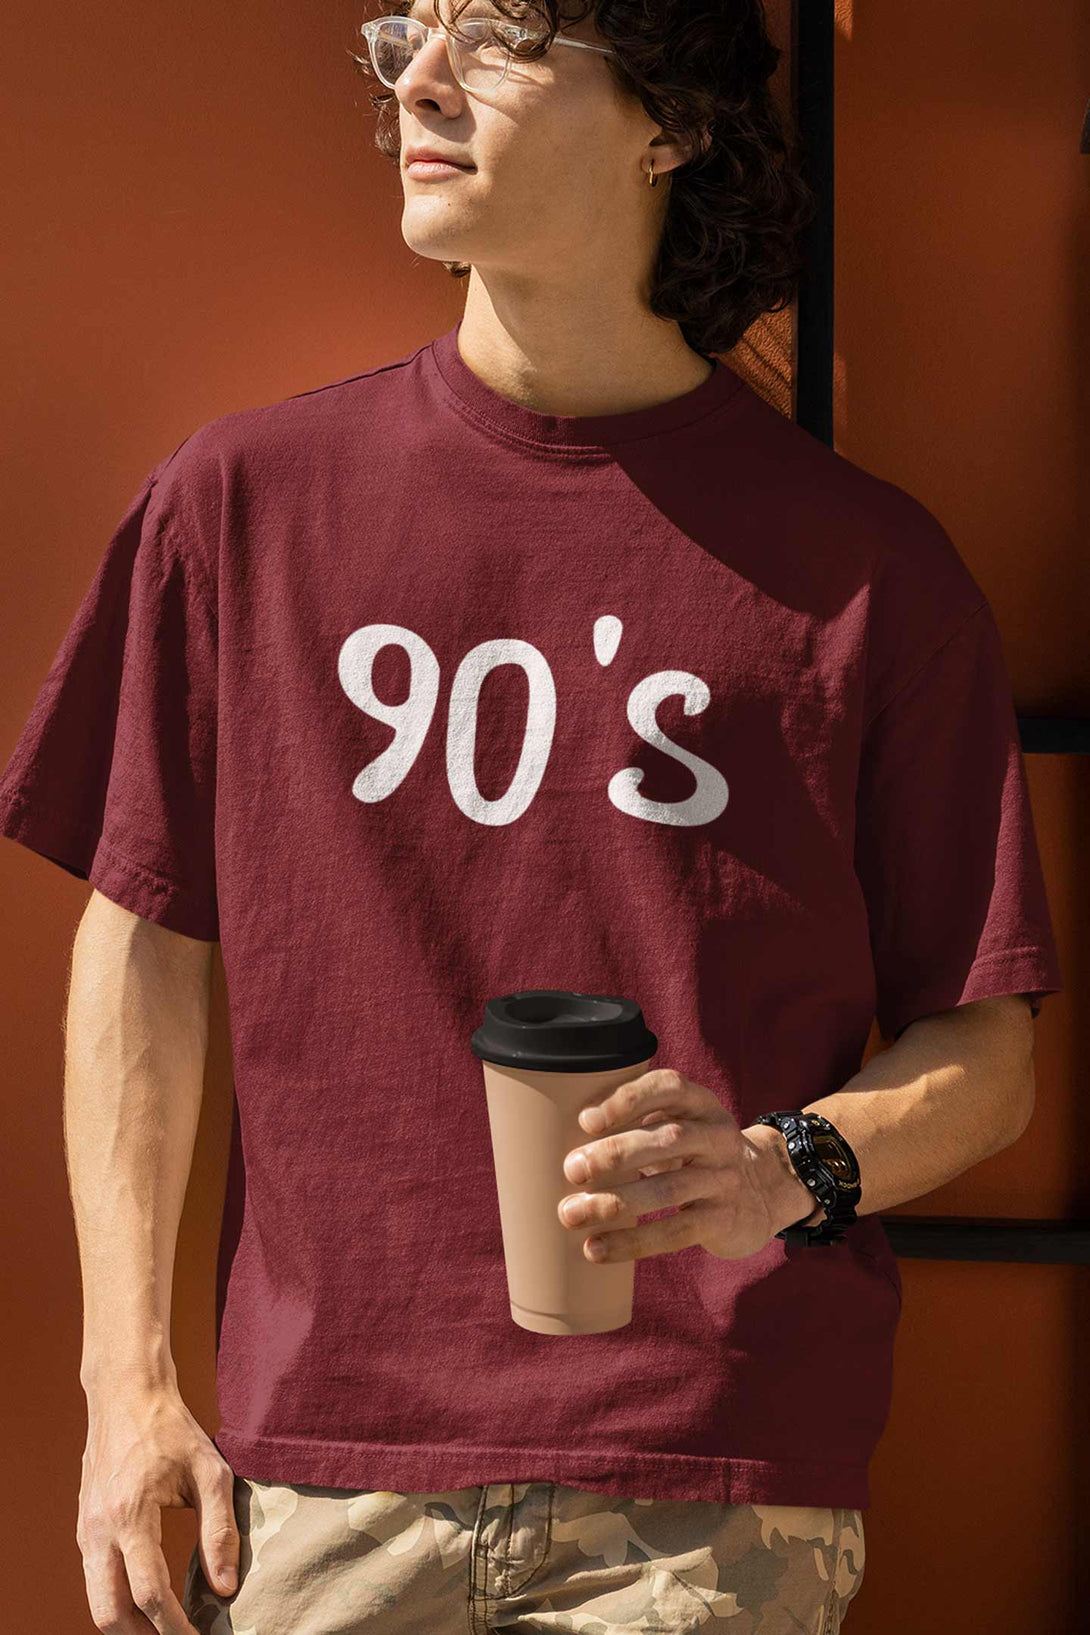 90 printed on Maroon Color Oversized Premium T shirt